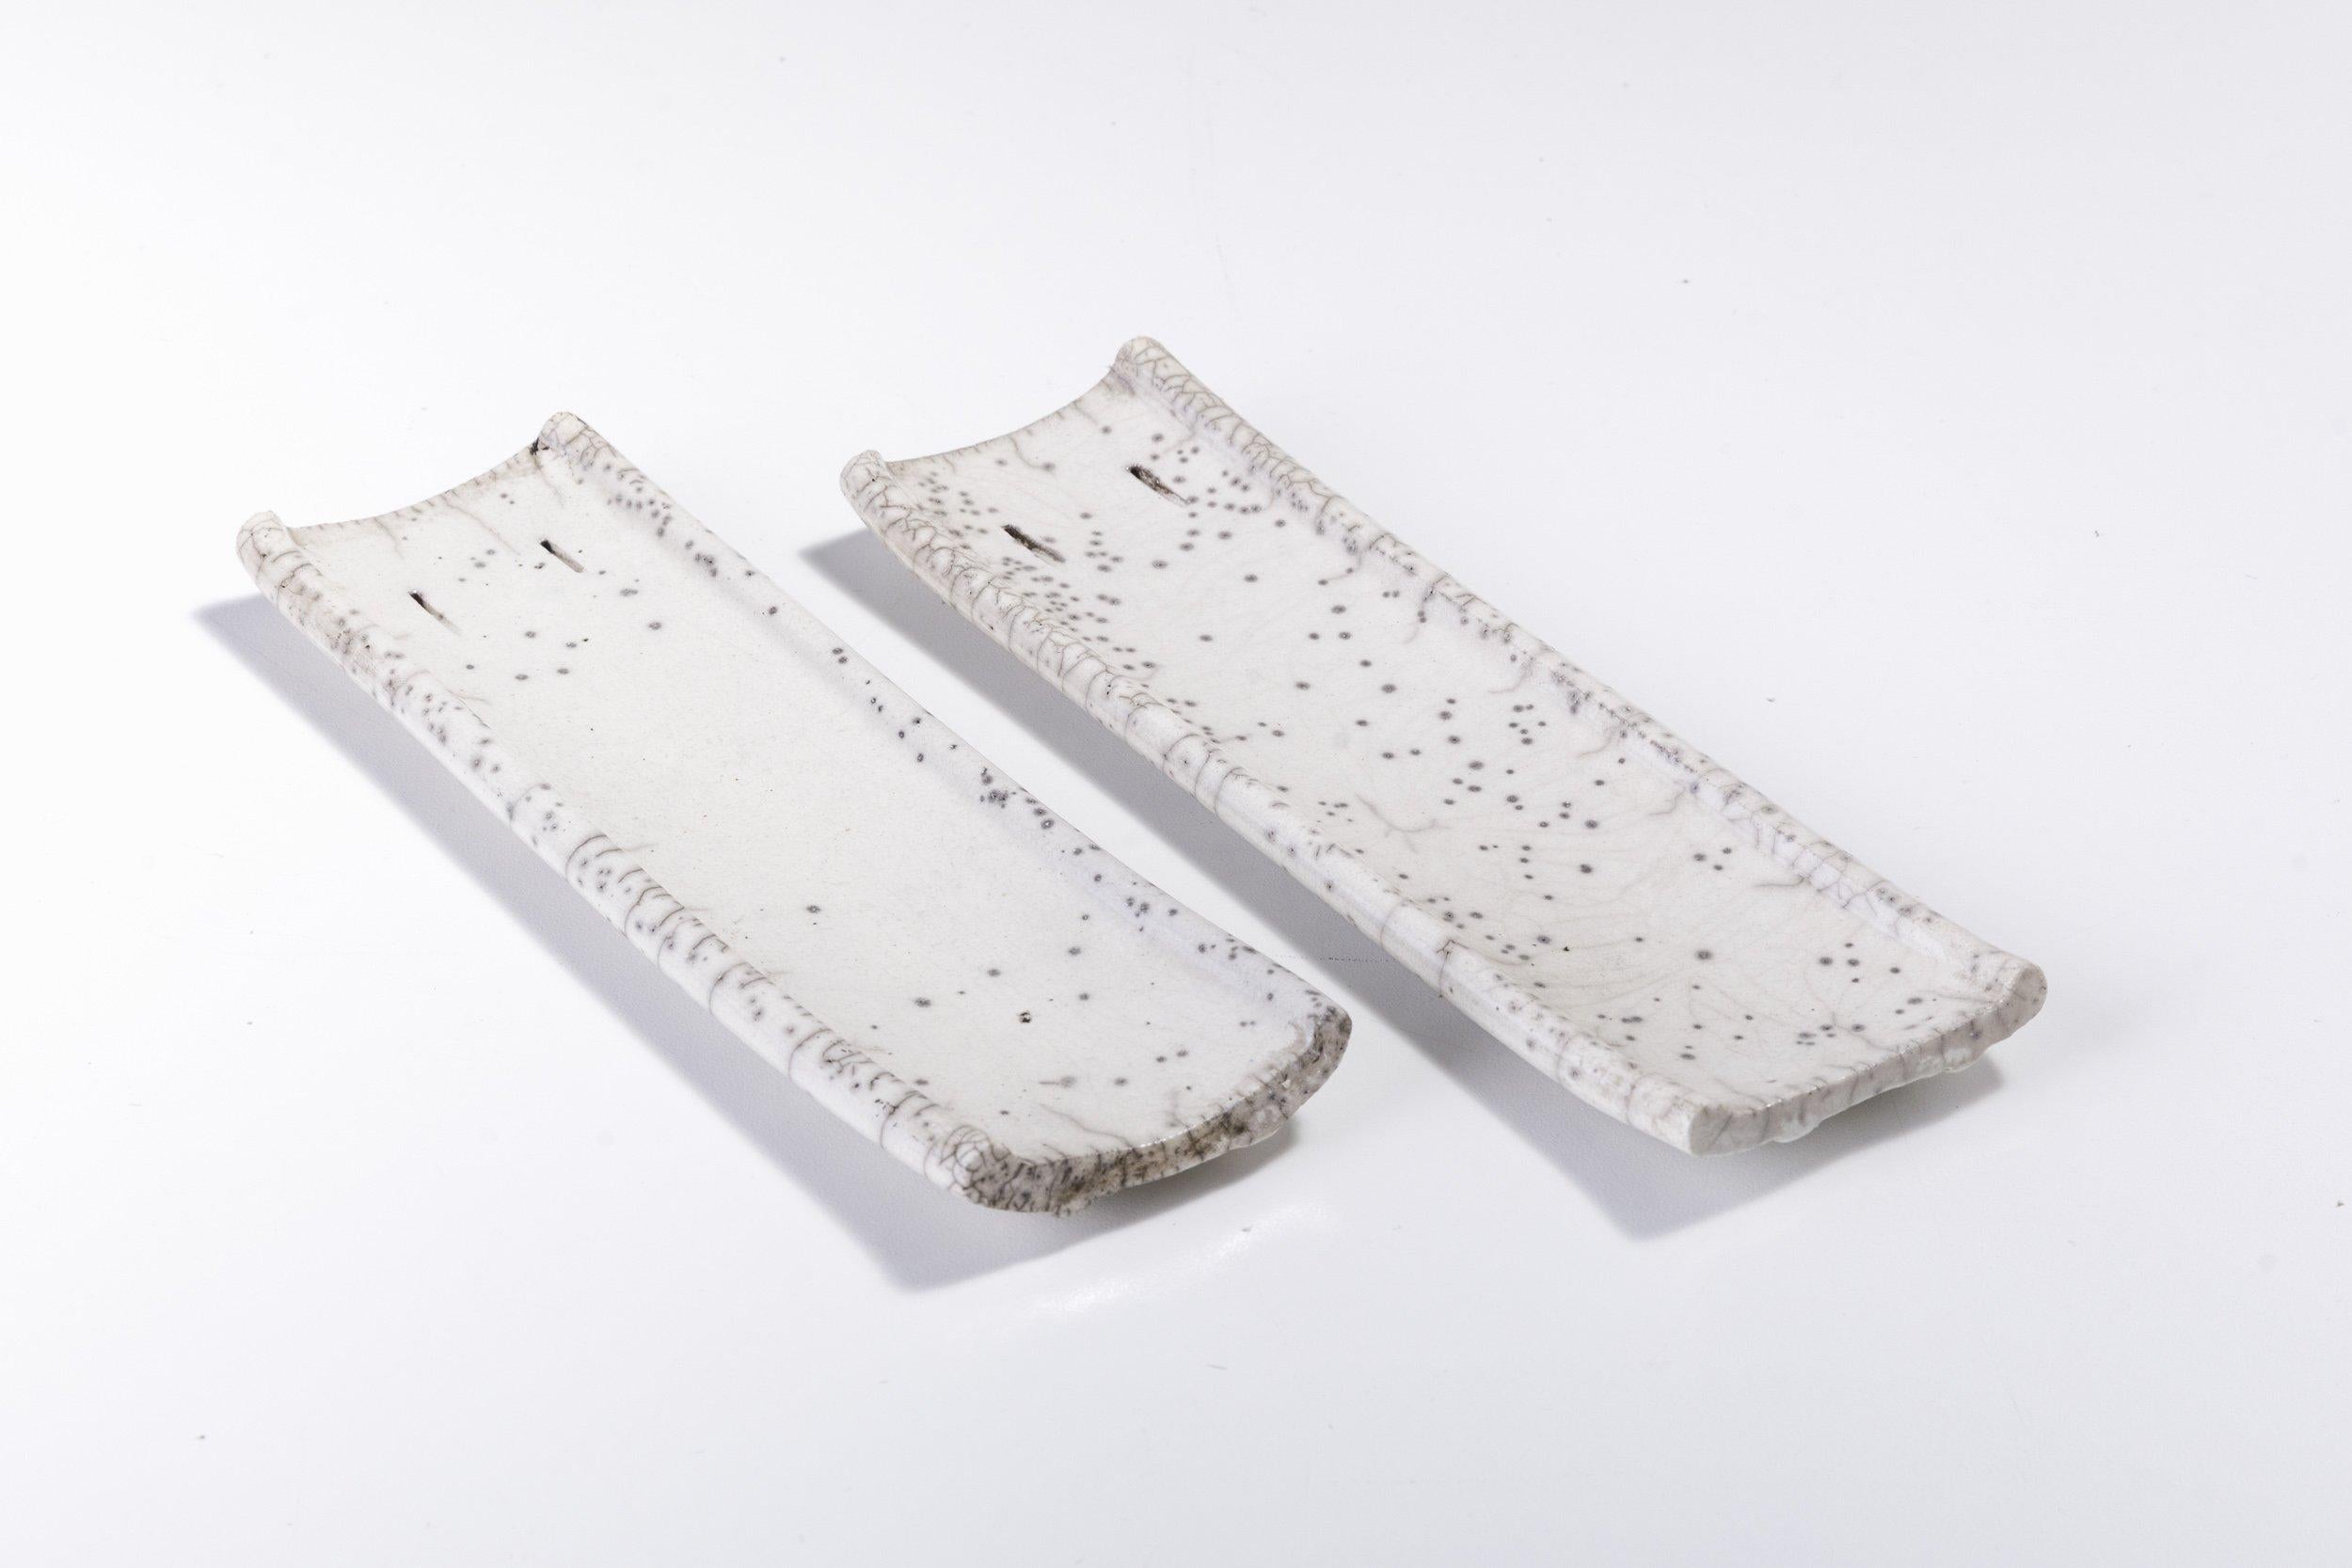 Incenso set

An extraordinary addition to a contemporary decor for a stunning visual allure, this set of two incense holders features a raw, porous shape deftly handcrafted following the Japanese technique of naked Raku ceramic firing. The two